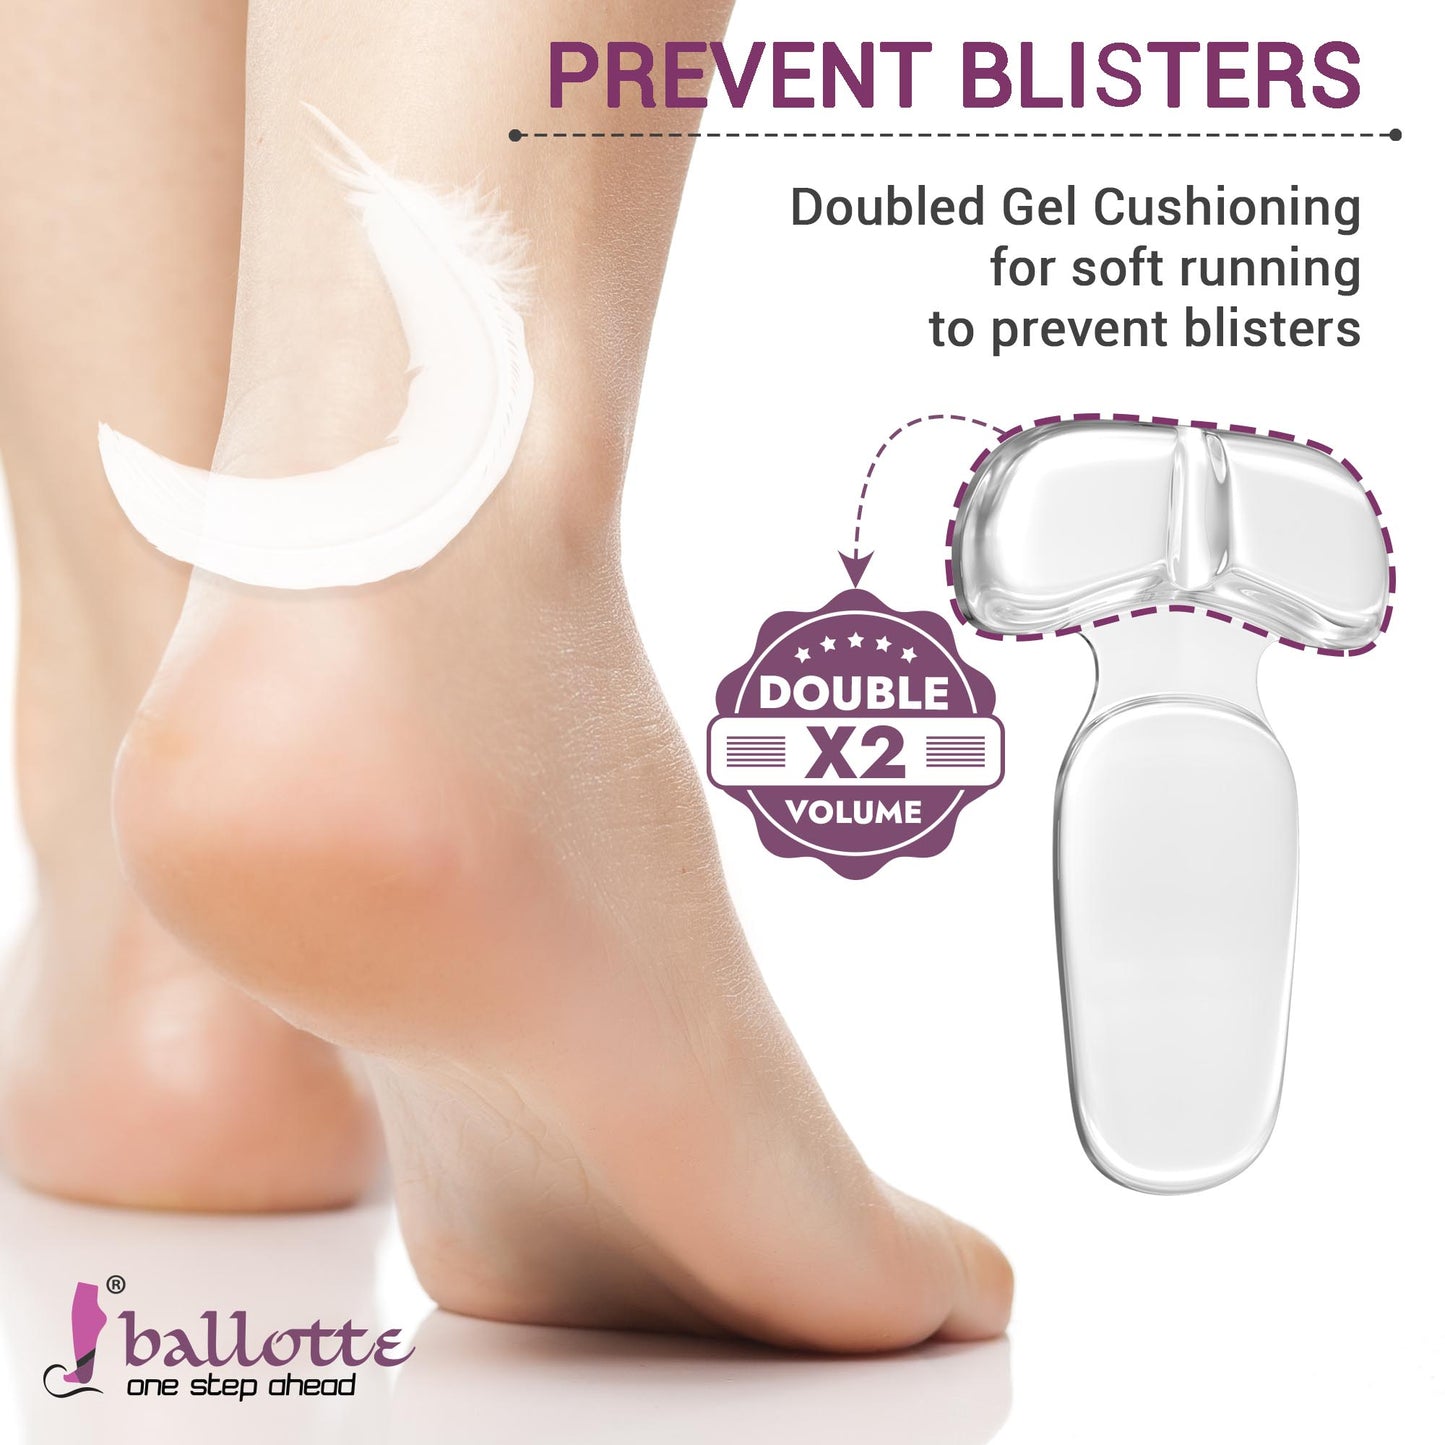 Clear & double-cushioned heel inserts